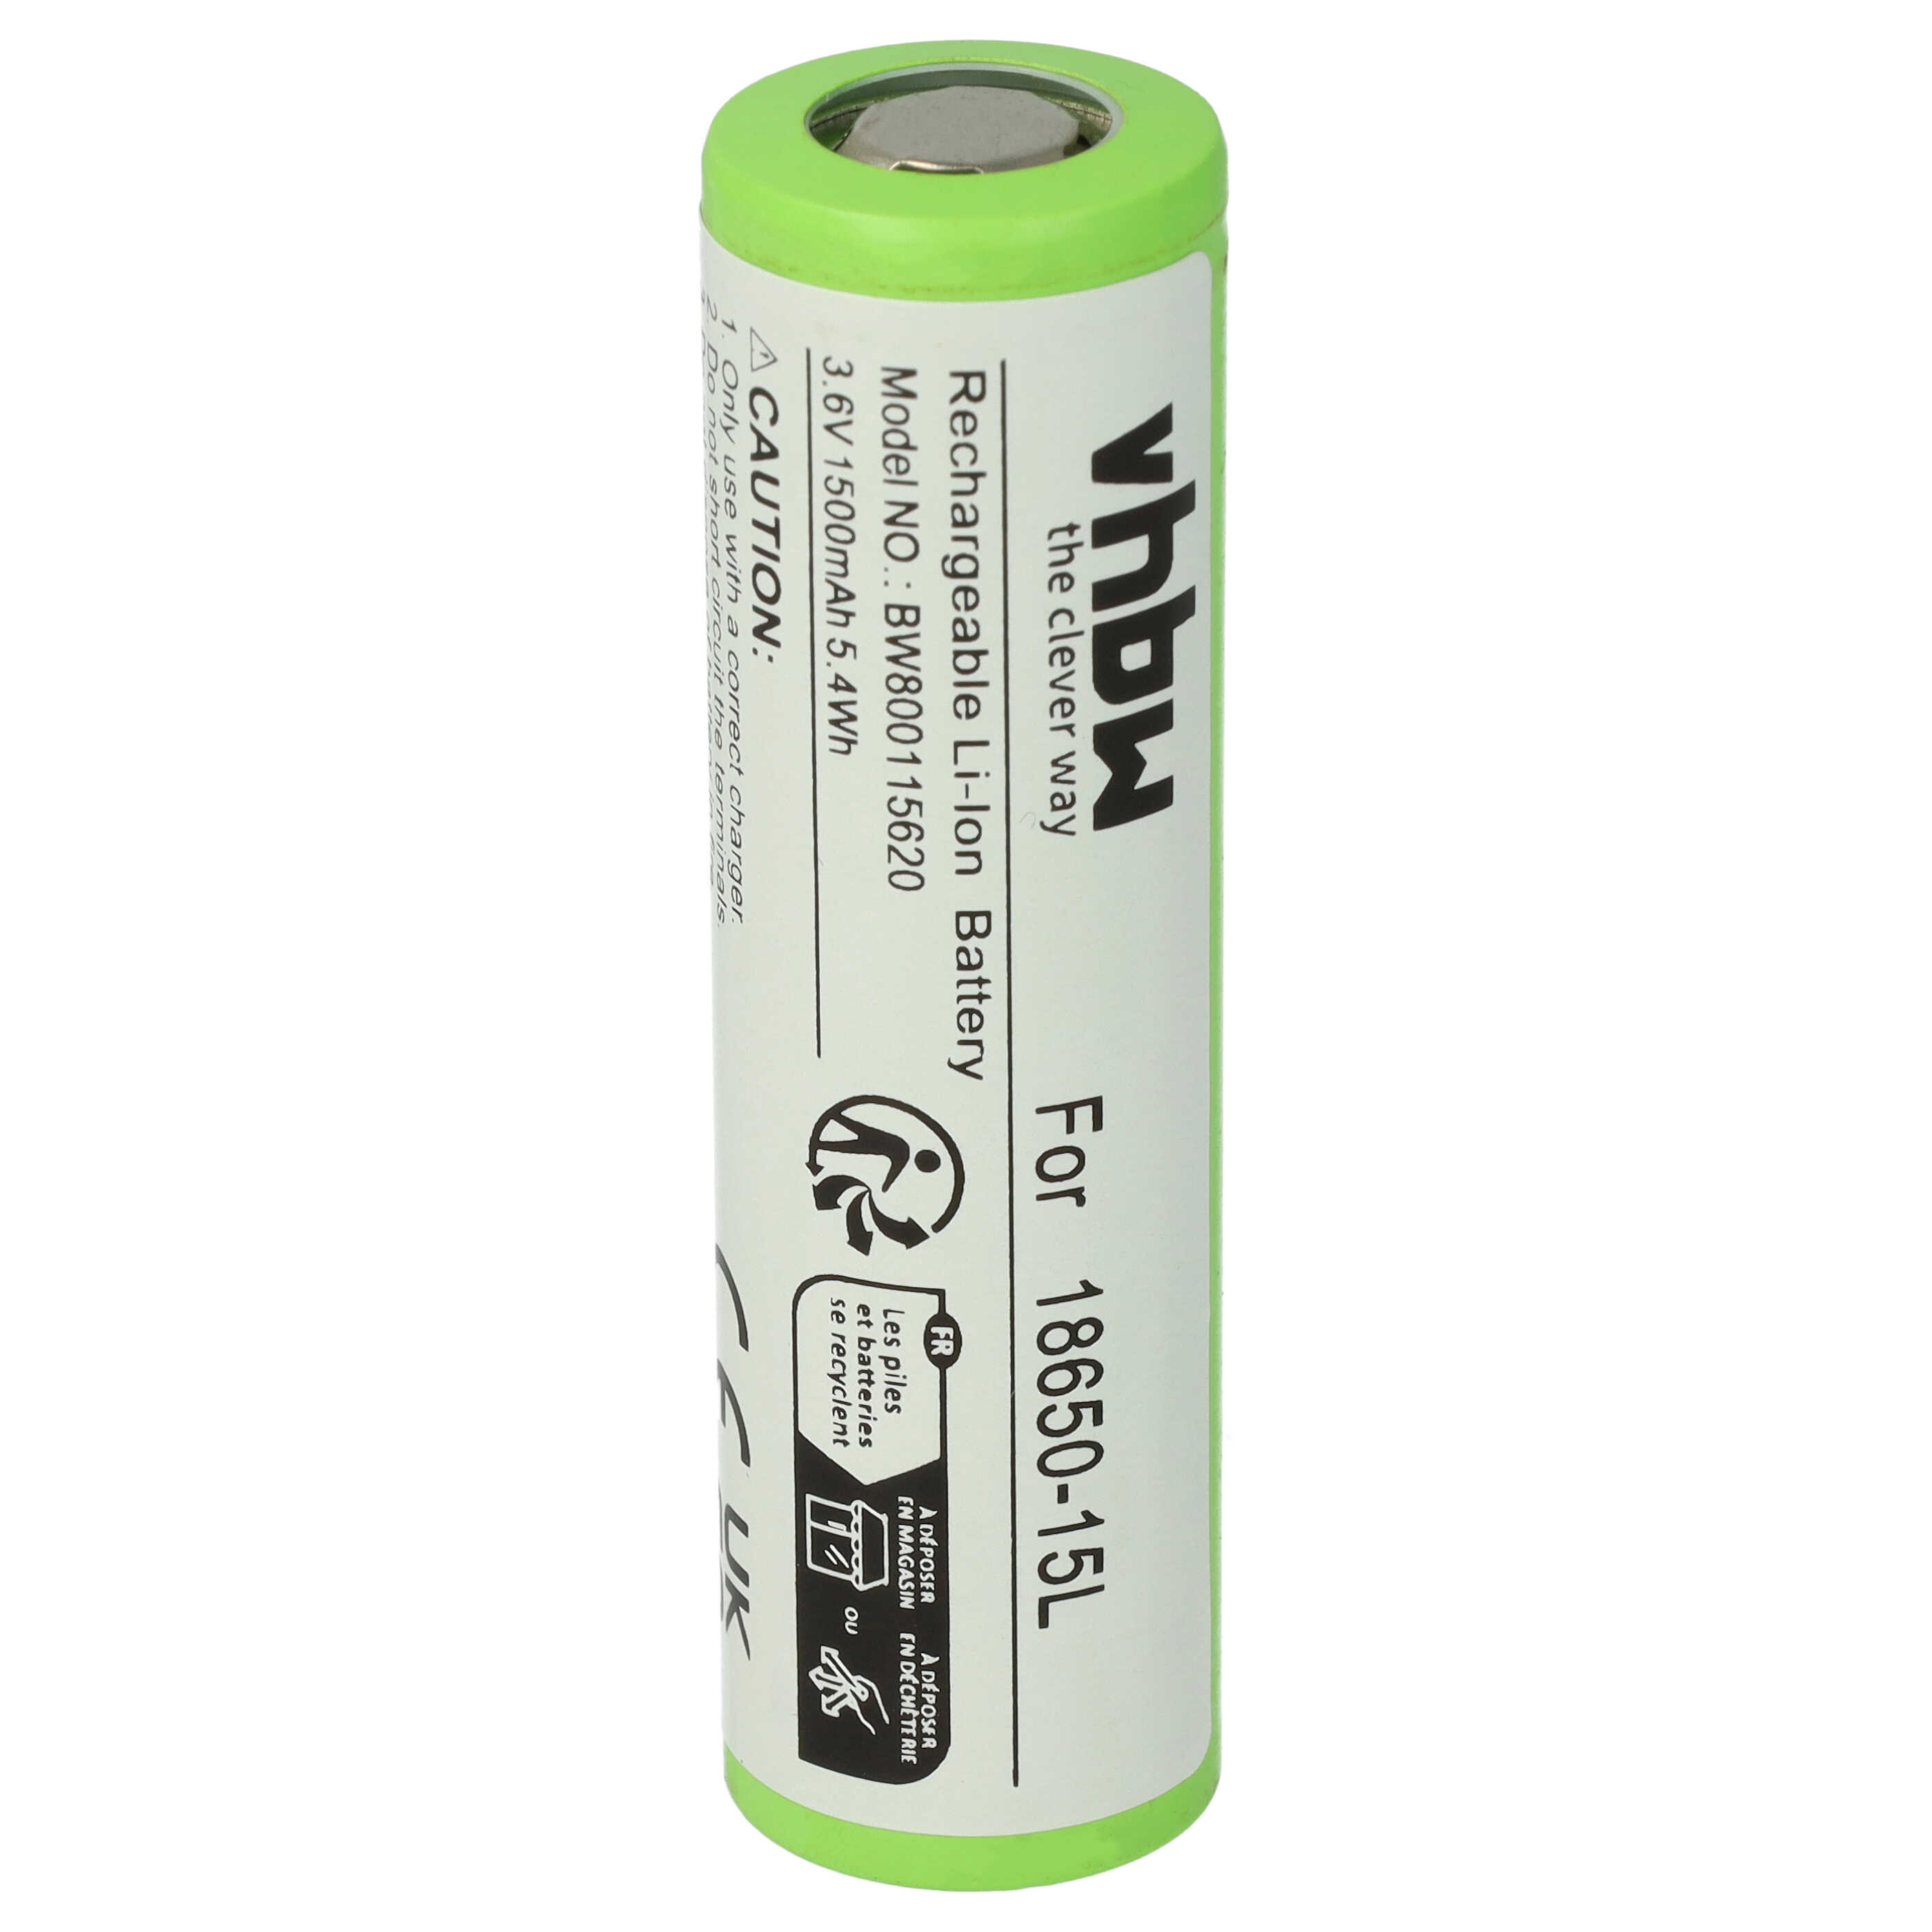 Raw Battery Cell for Rechargeable Batteries - 1500mAh 3.6V LiNiMnCoO2